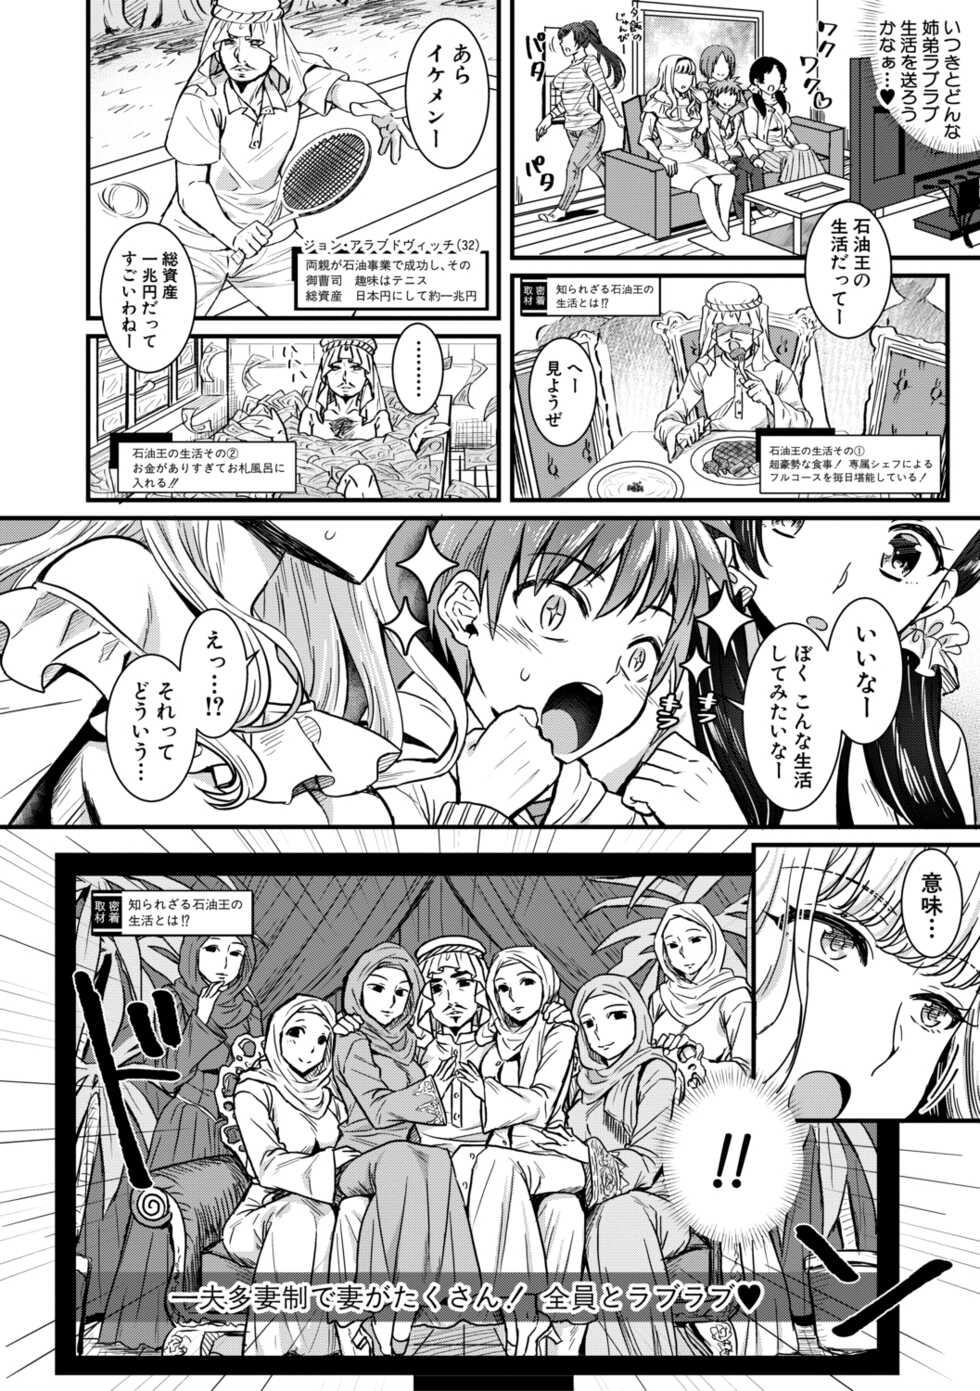 [Poyamu] Yonshimai wa Otouto to Harem shitai! - Four sisters want to harem with their younger brother. [Digital] - Page 8